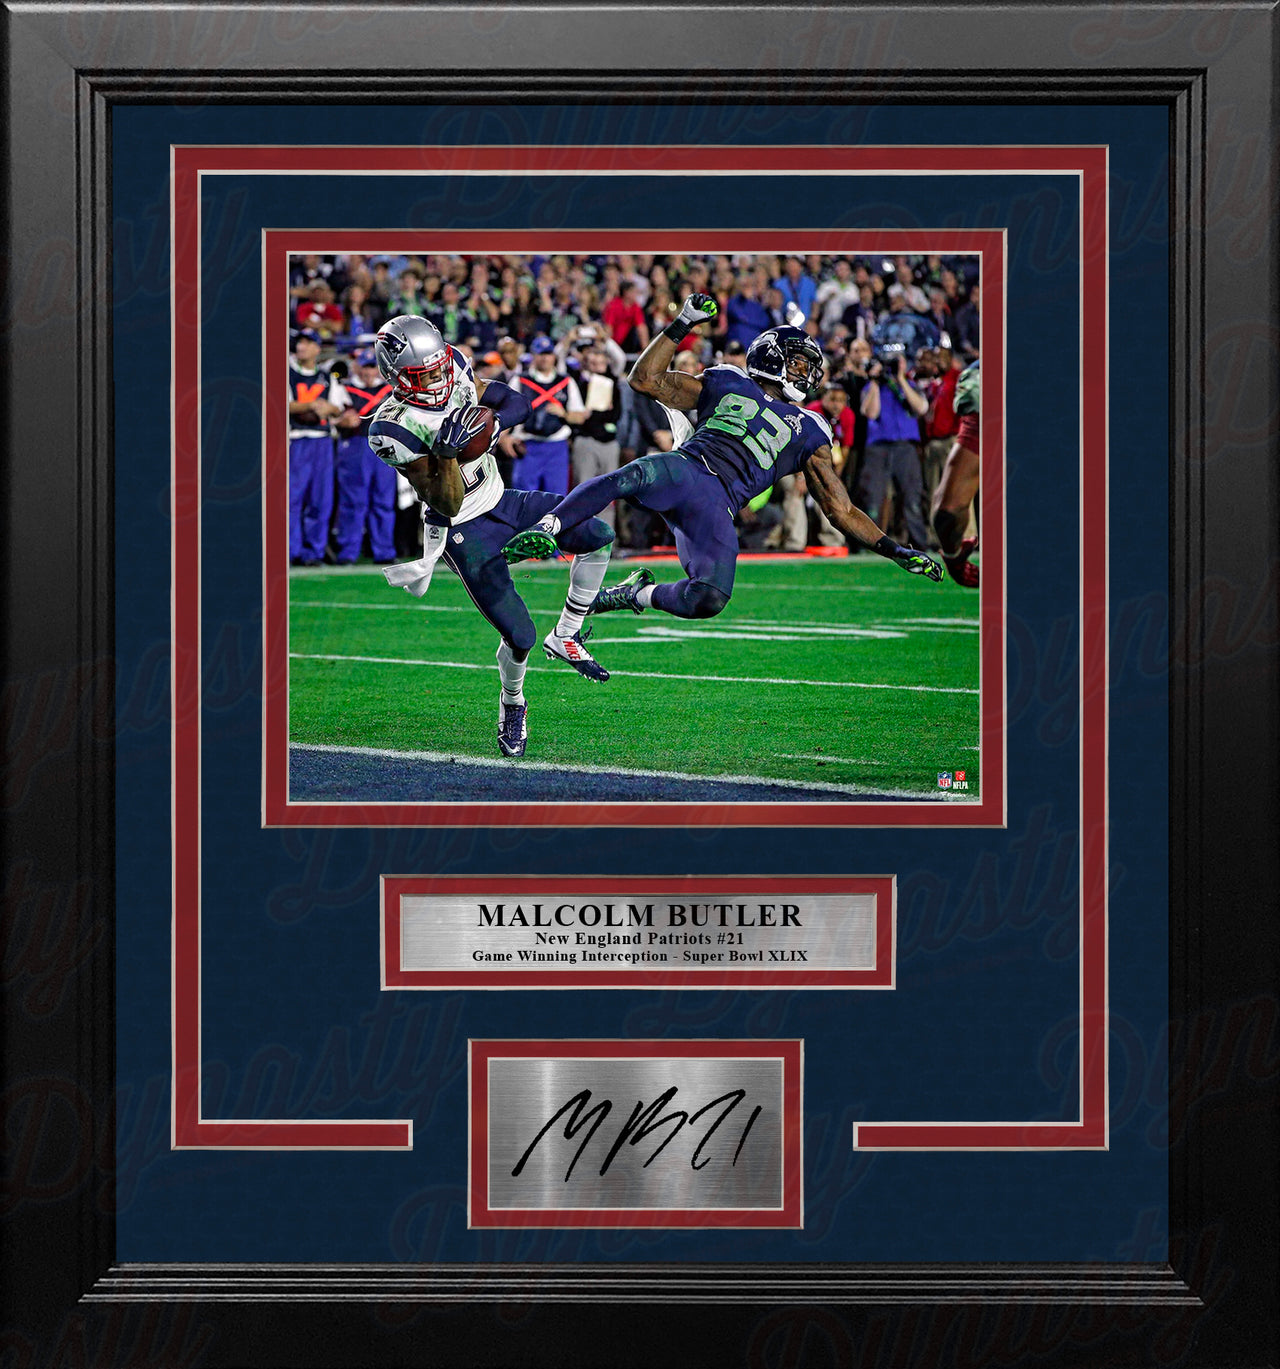 Malcolm Butler Super Bowl Interception New England Patriots 8x10 Framed Photo and Engraved Autograph - Dynasty Sports & Framing 